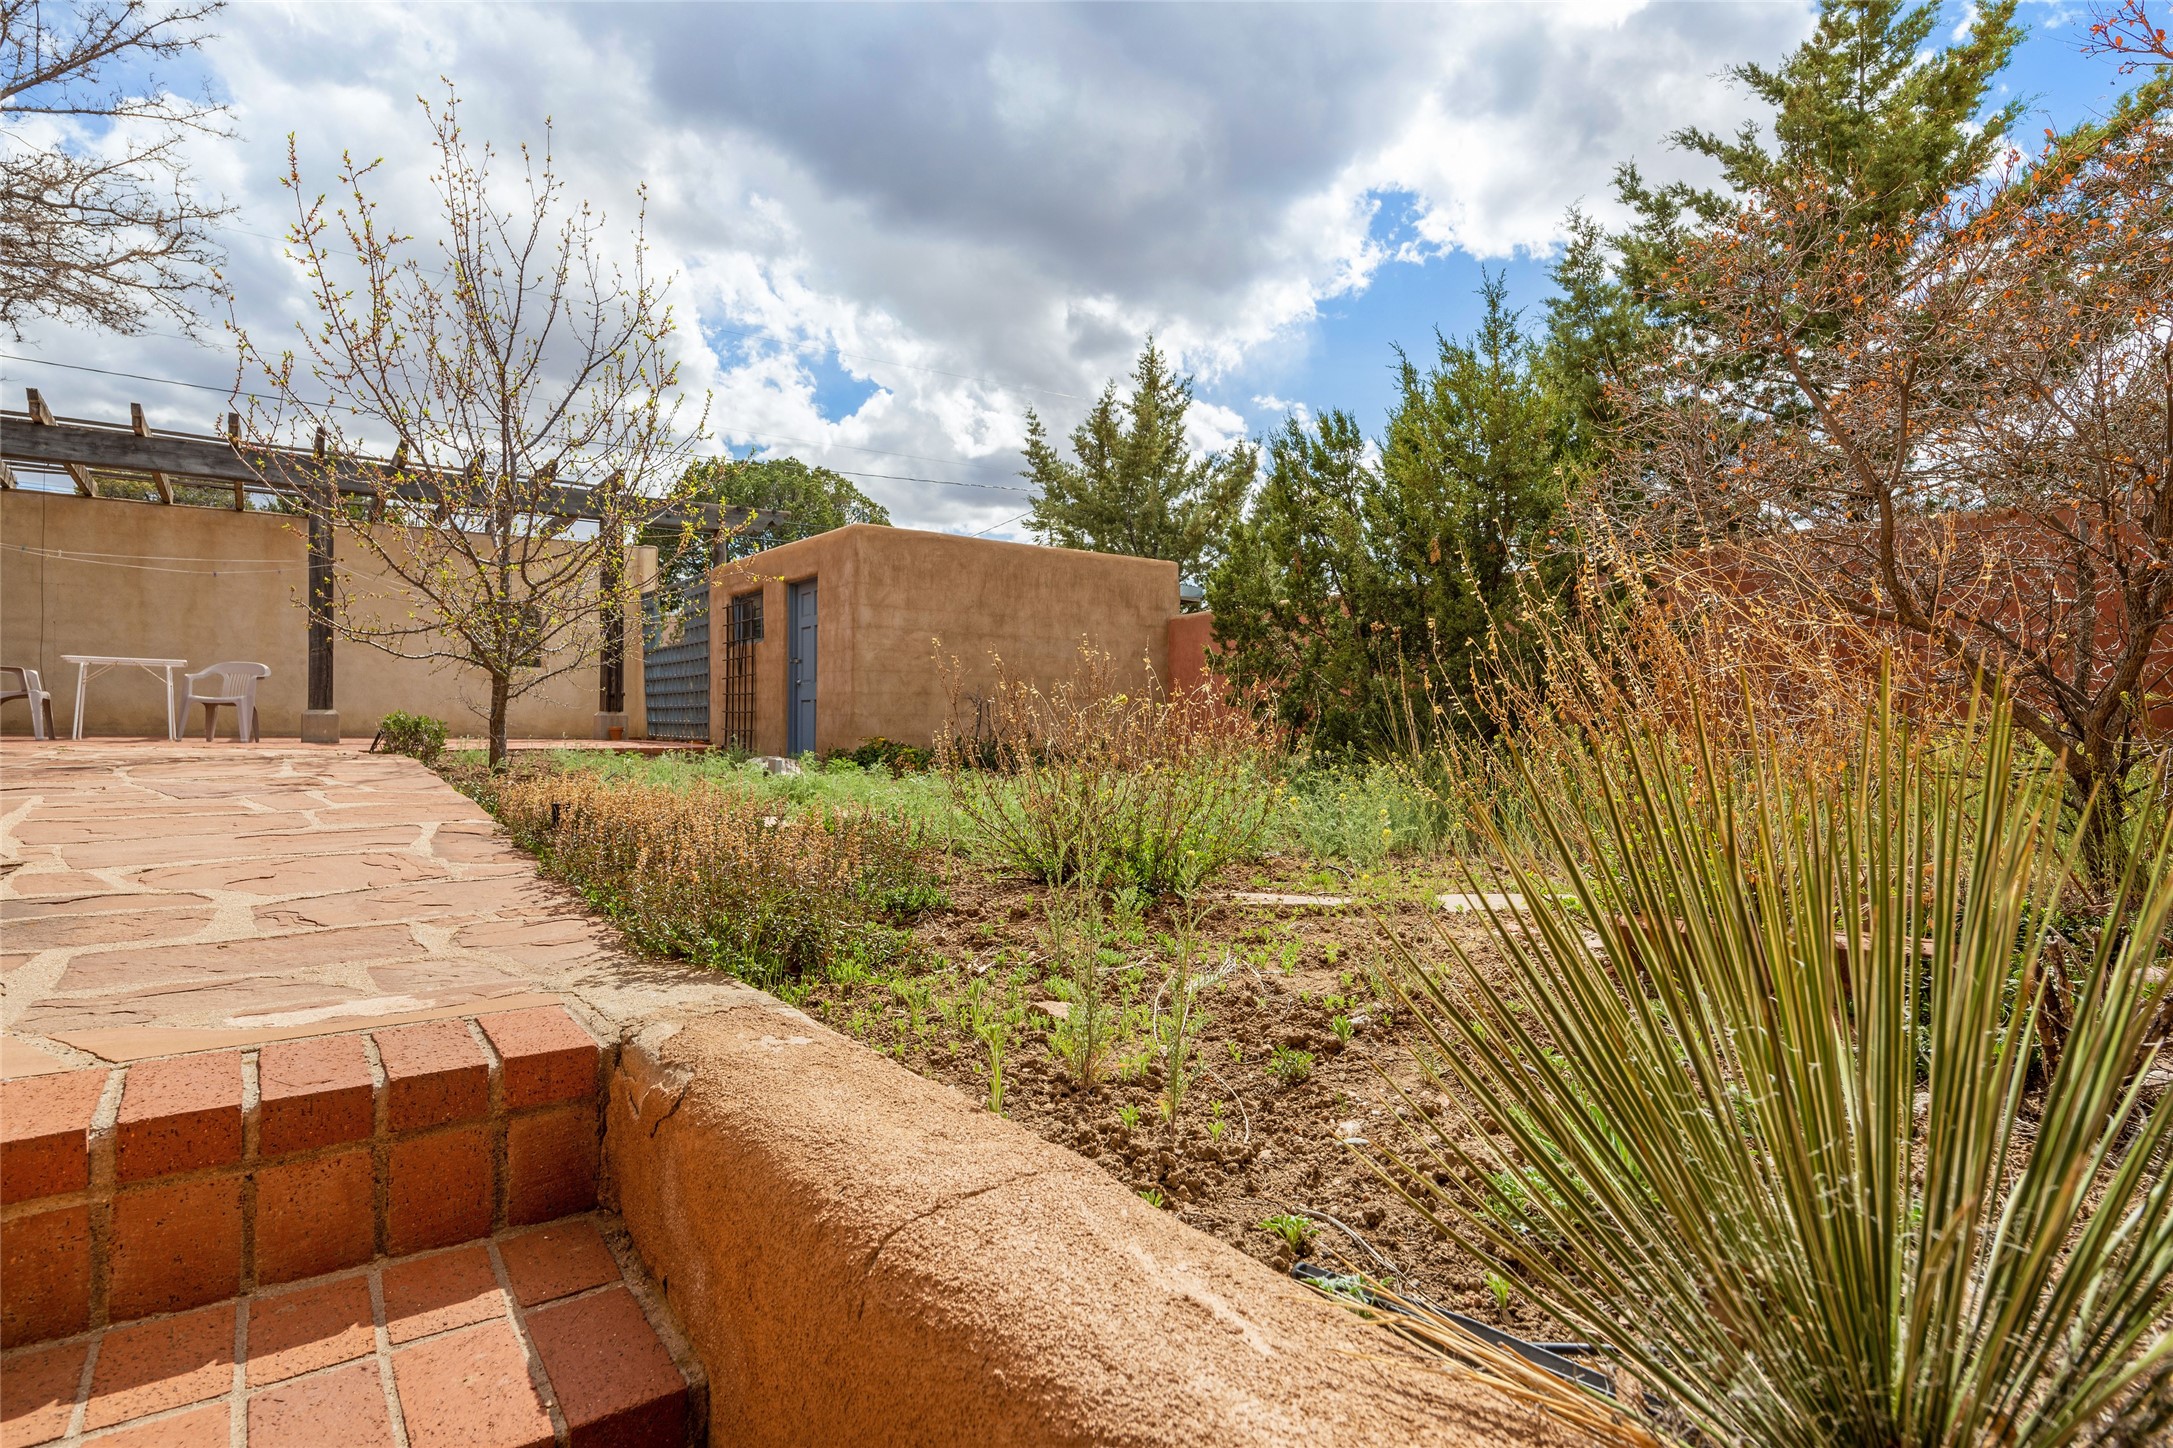 234 W San Mateo, Santa Fe, New Mexico 87505, 3 Bedrooms Bedrooms, ,3 BathroomsBathrooms,Residential,For Sale,234 W San Mateo,202336518